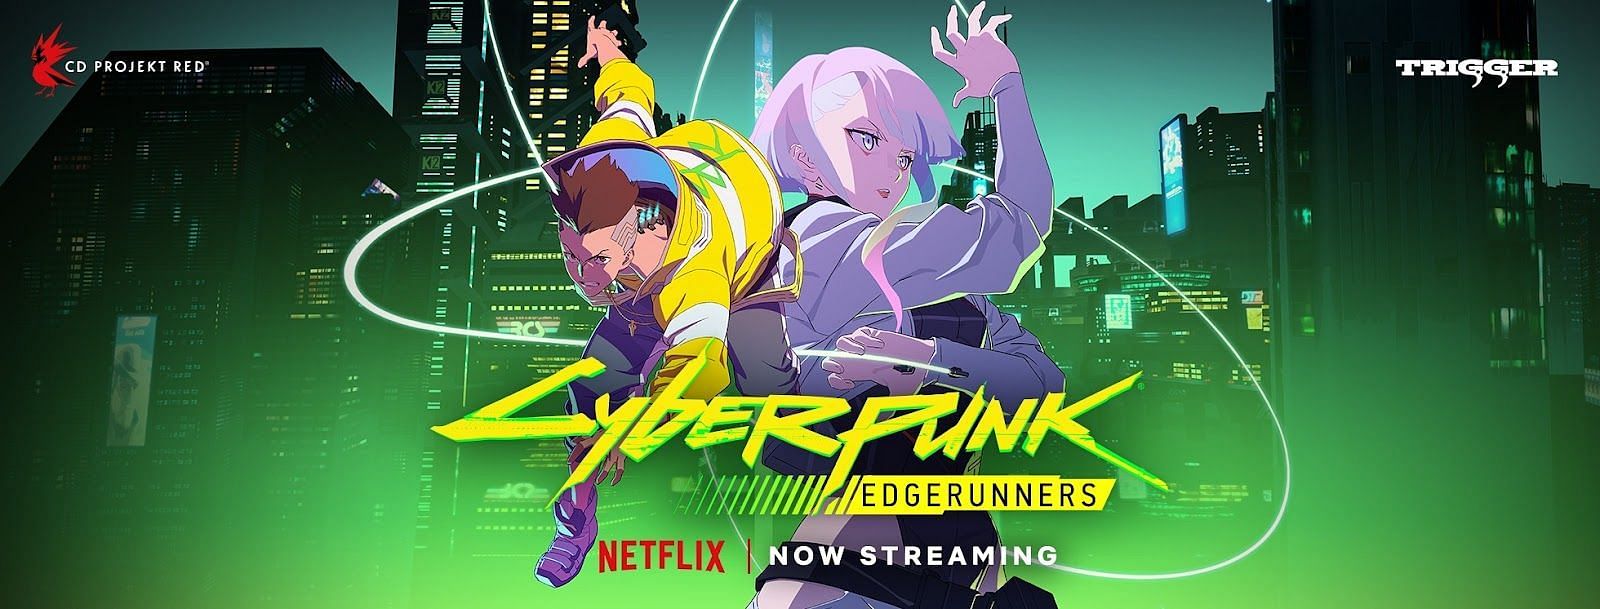 Who are the English voice actors of Cyberpunk Edgerunners